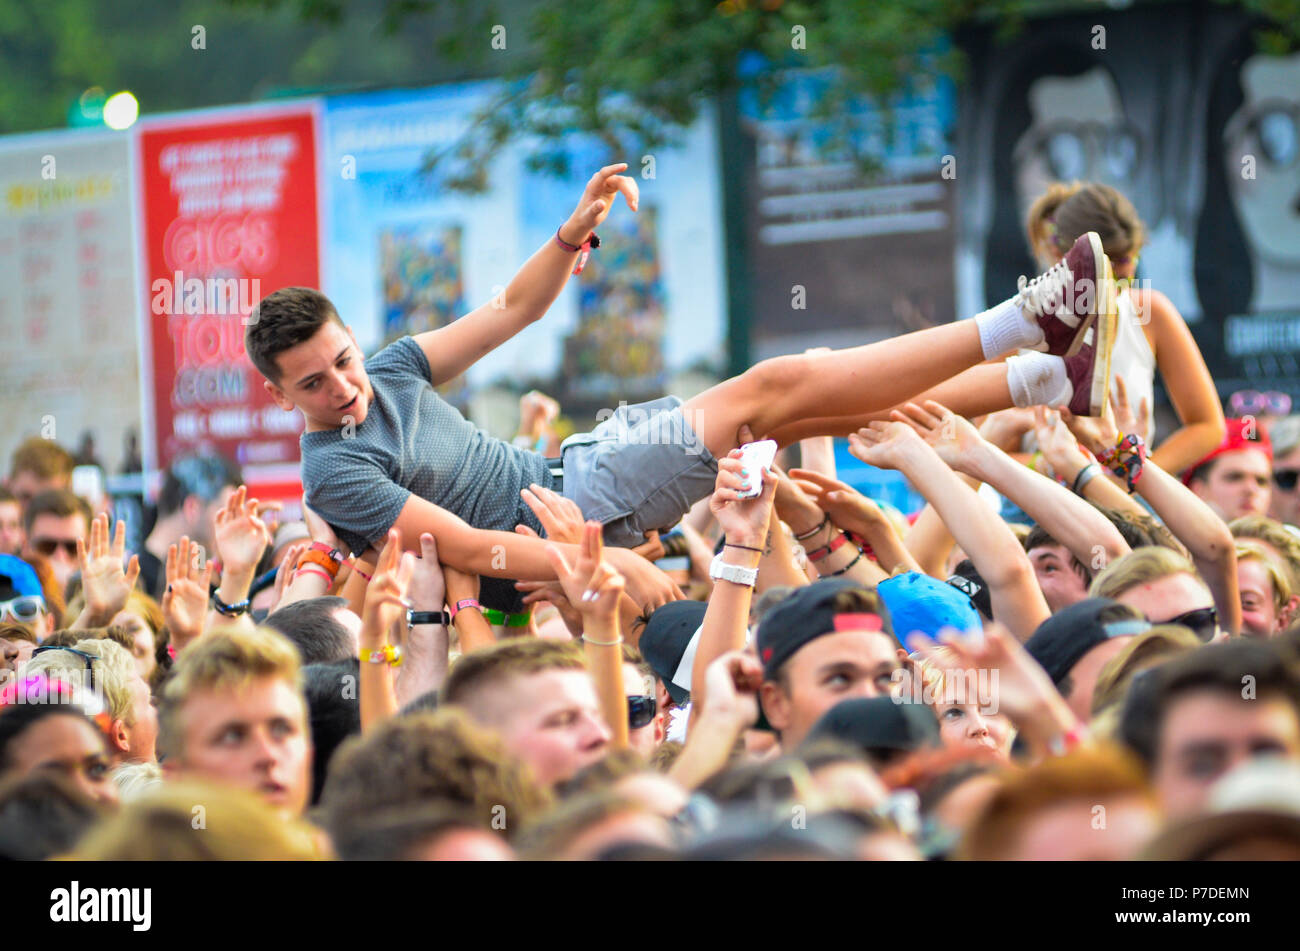 Music Fans Waving Hands in the Air at a Music Festival Stock Photo